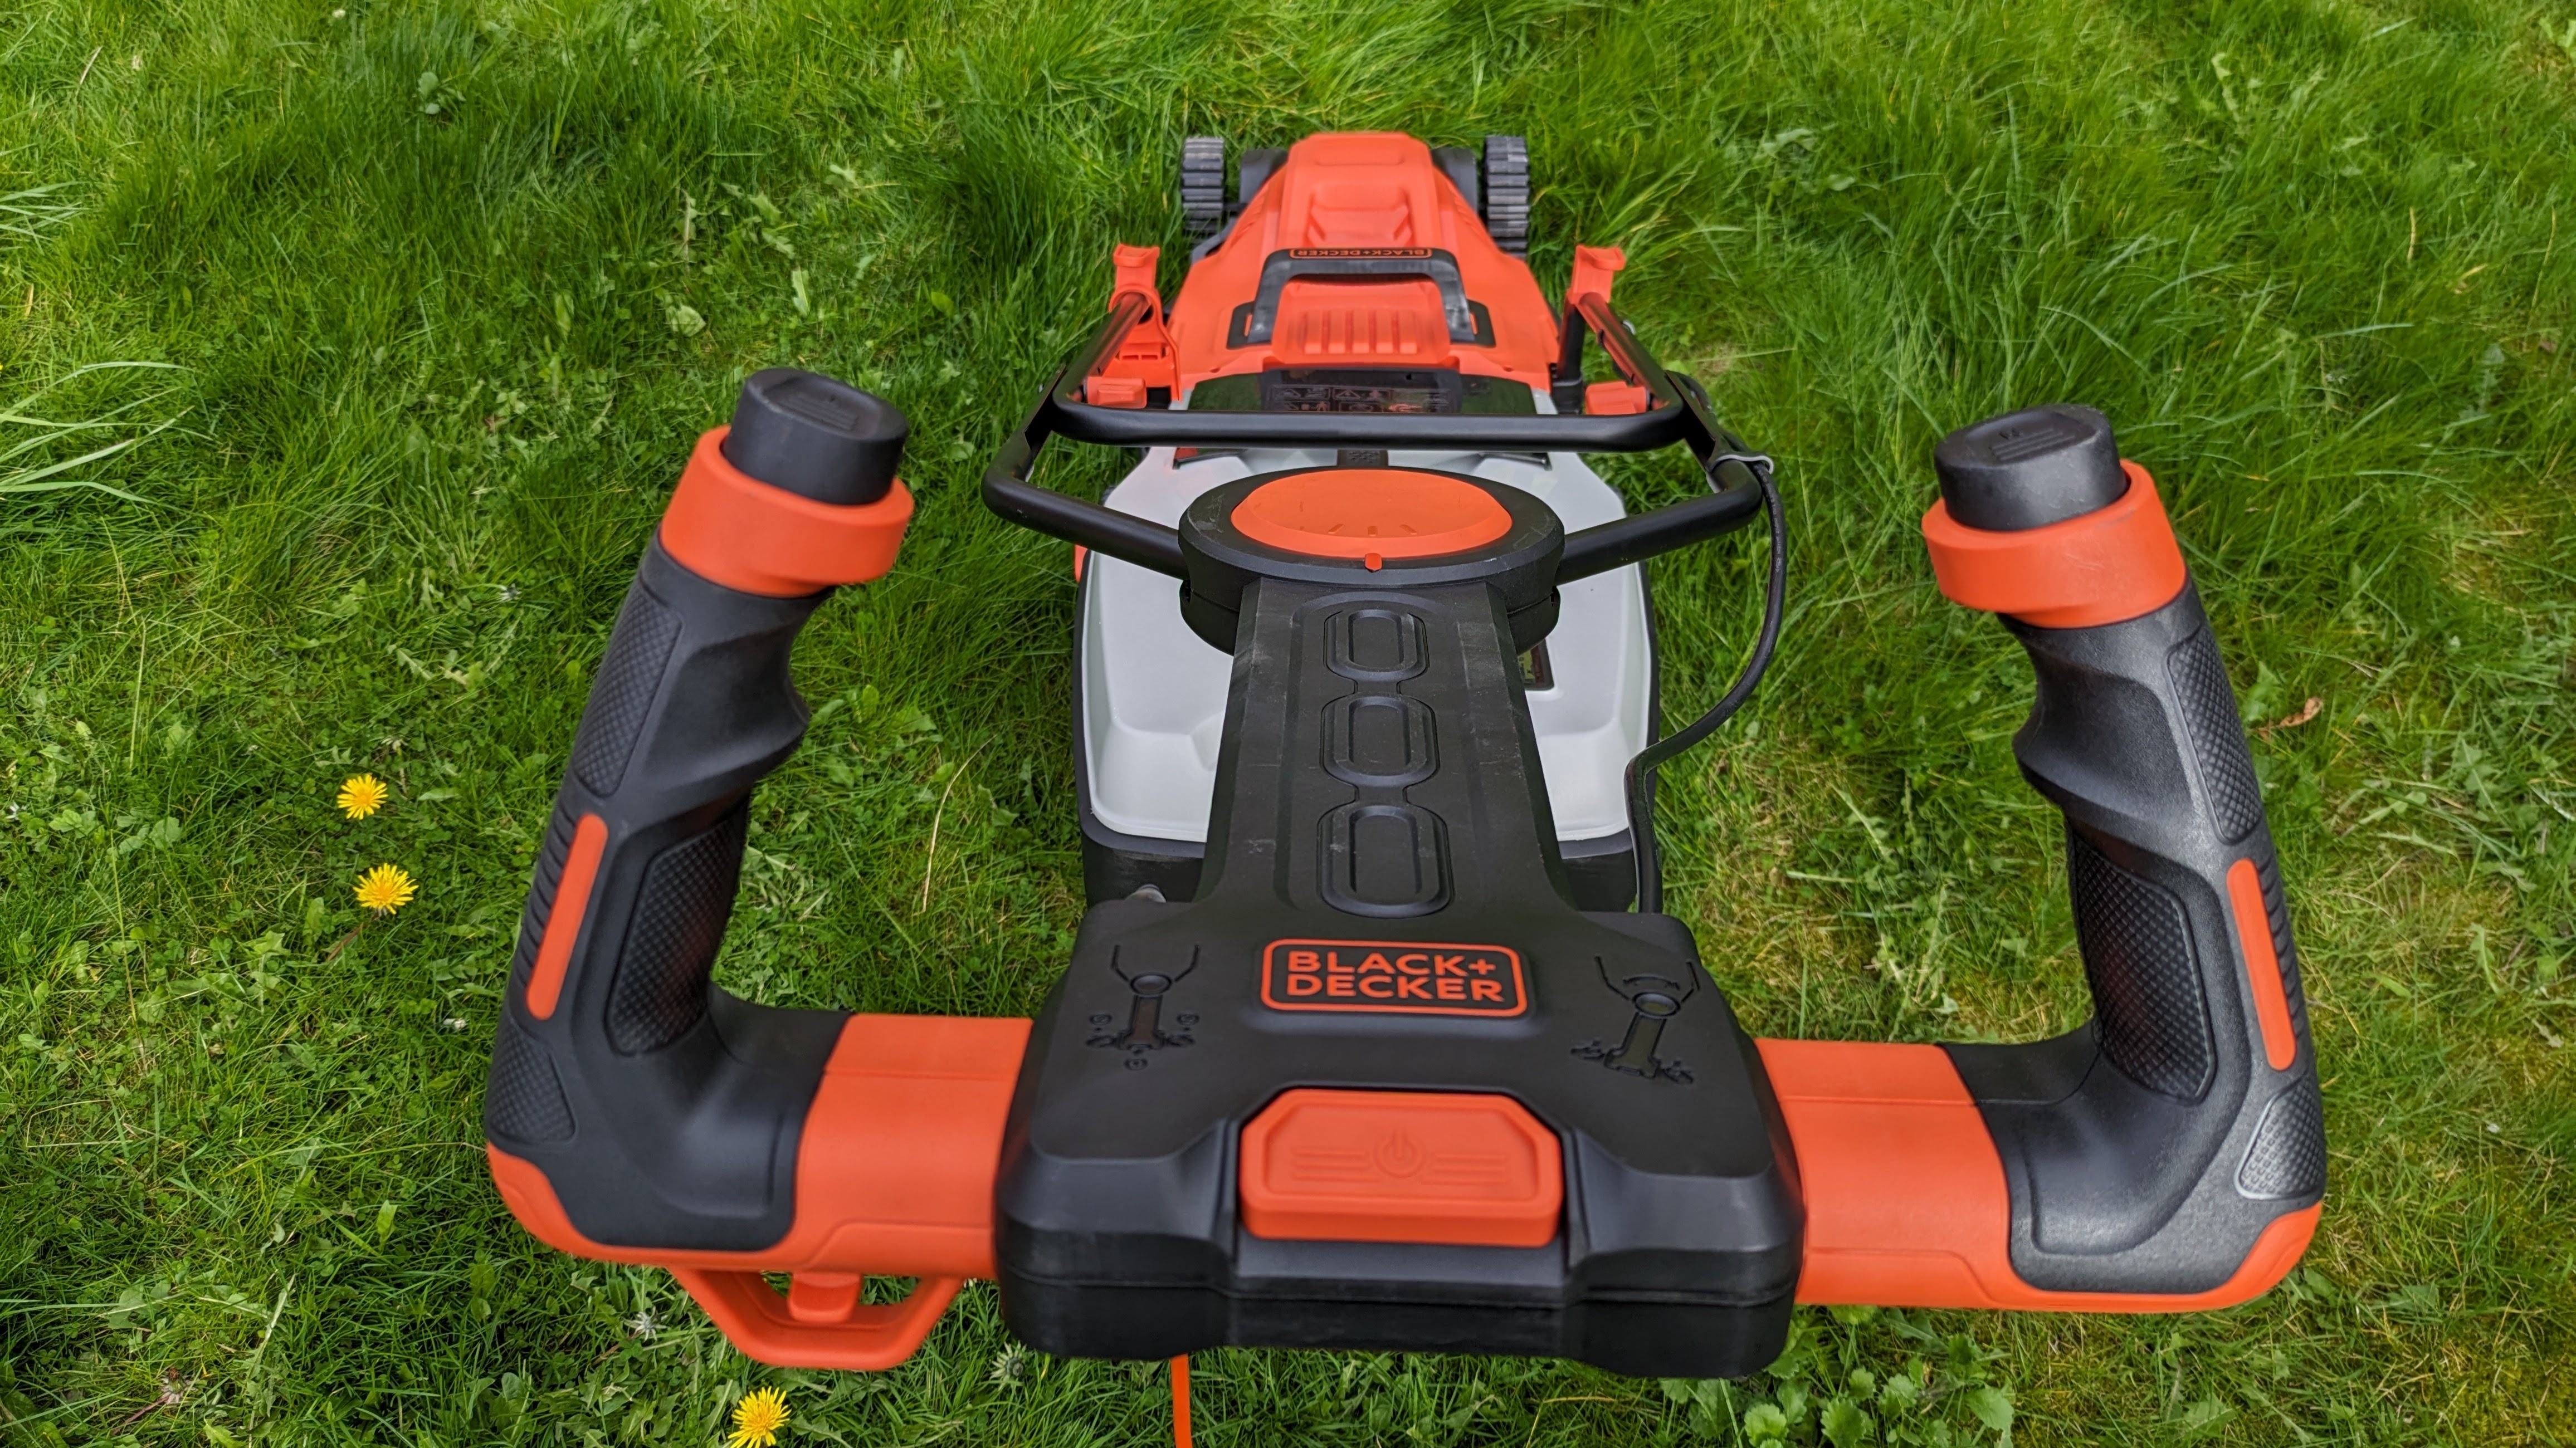 Both the US and UK versions of Black + Decker's mower have unusual upright handles, although the steering mechanisms work slightly differently.